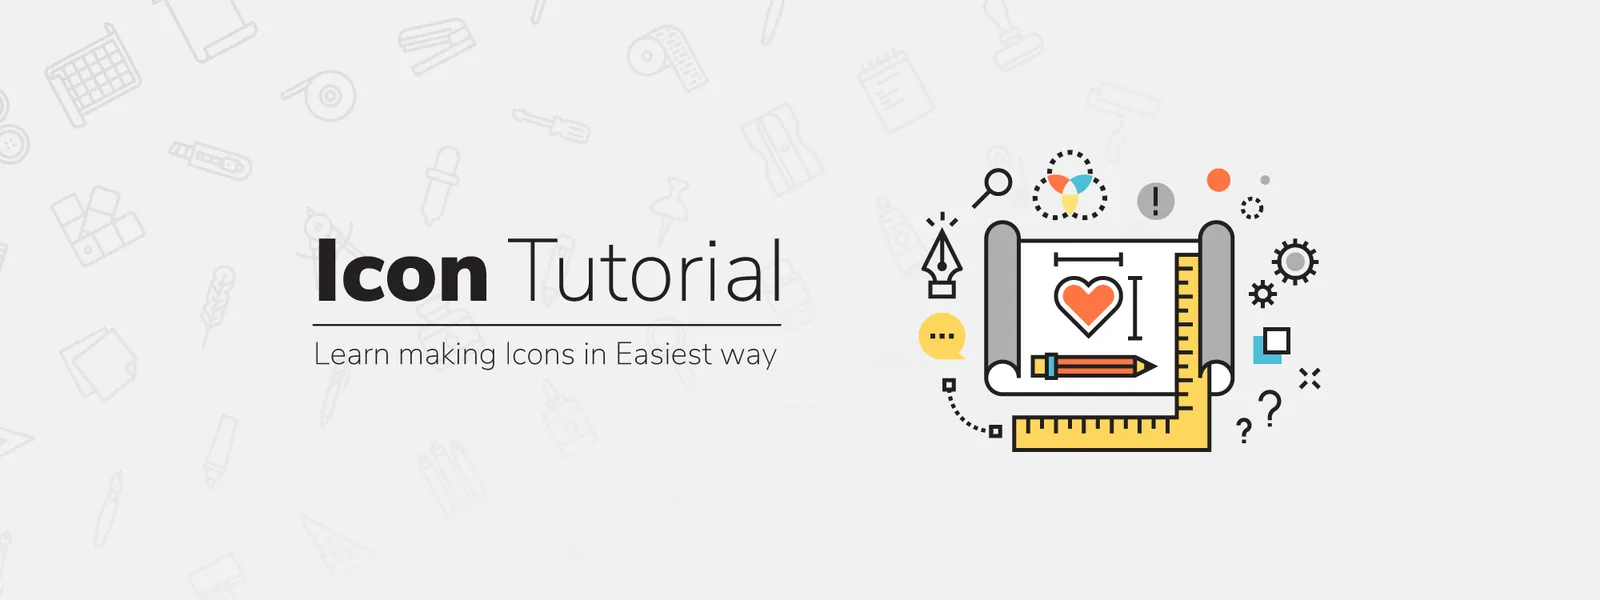 How to Make Cloud icon in Adobe Illustrator